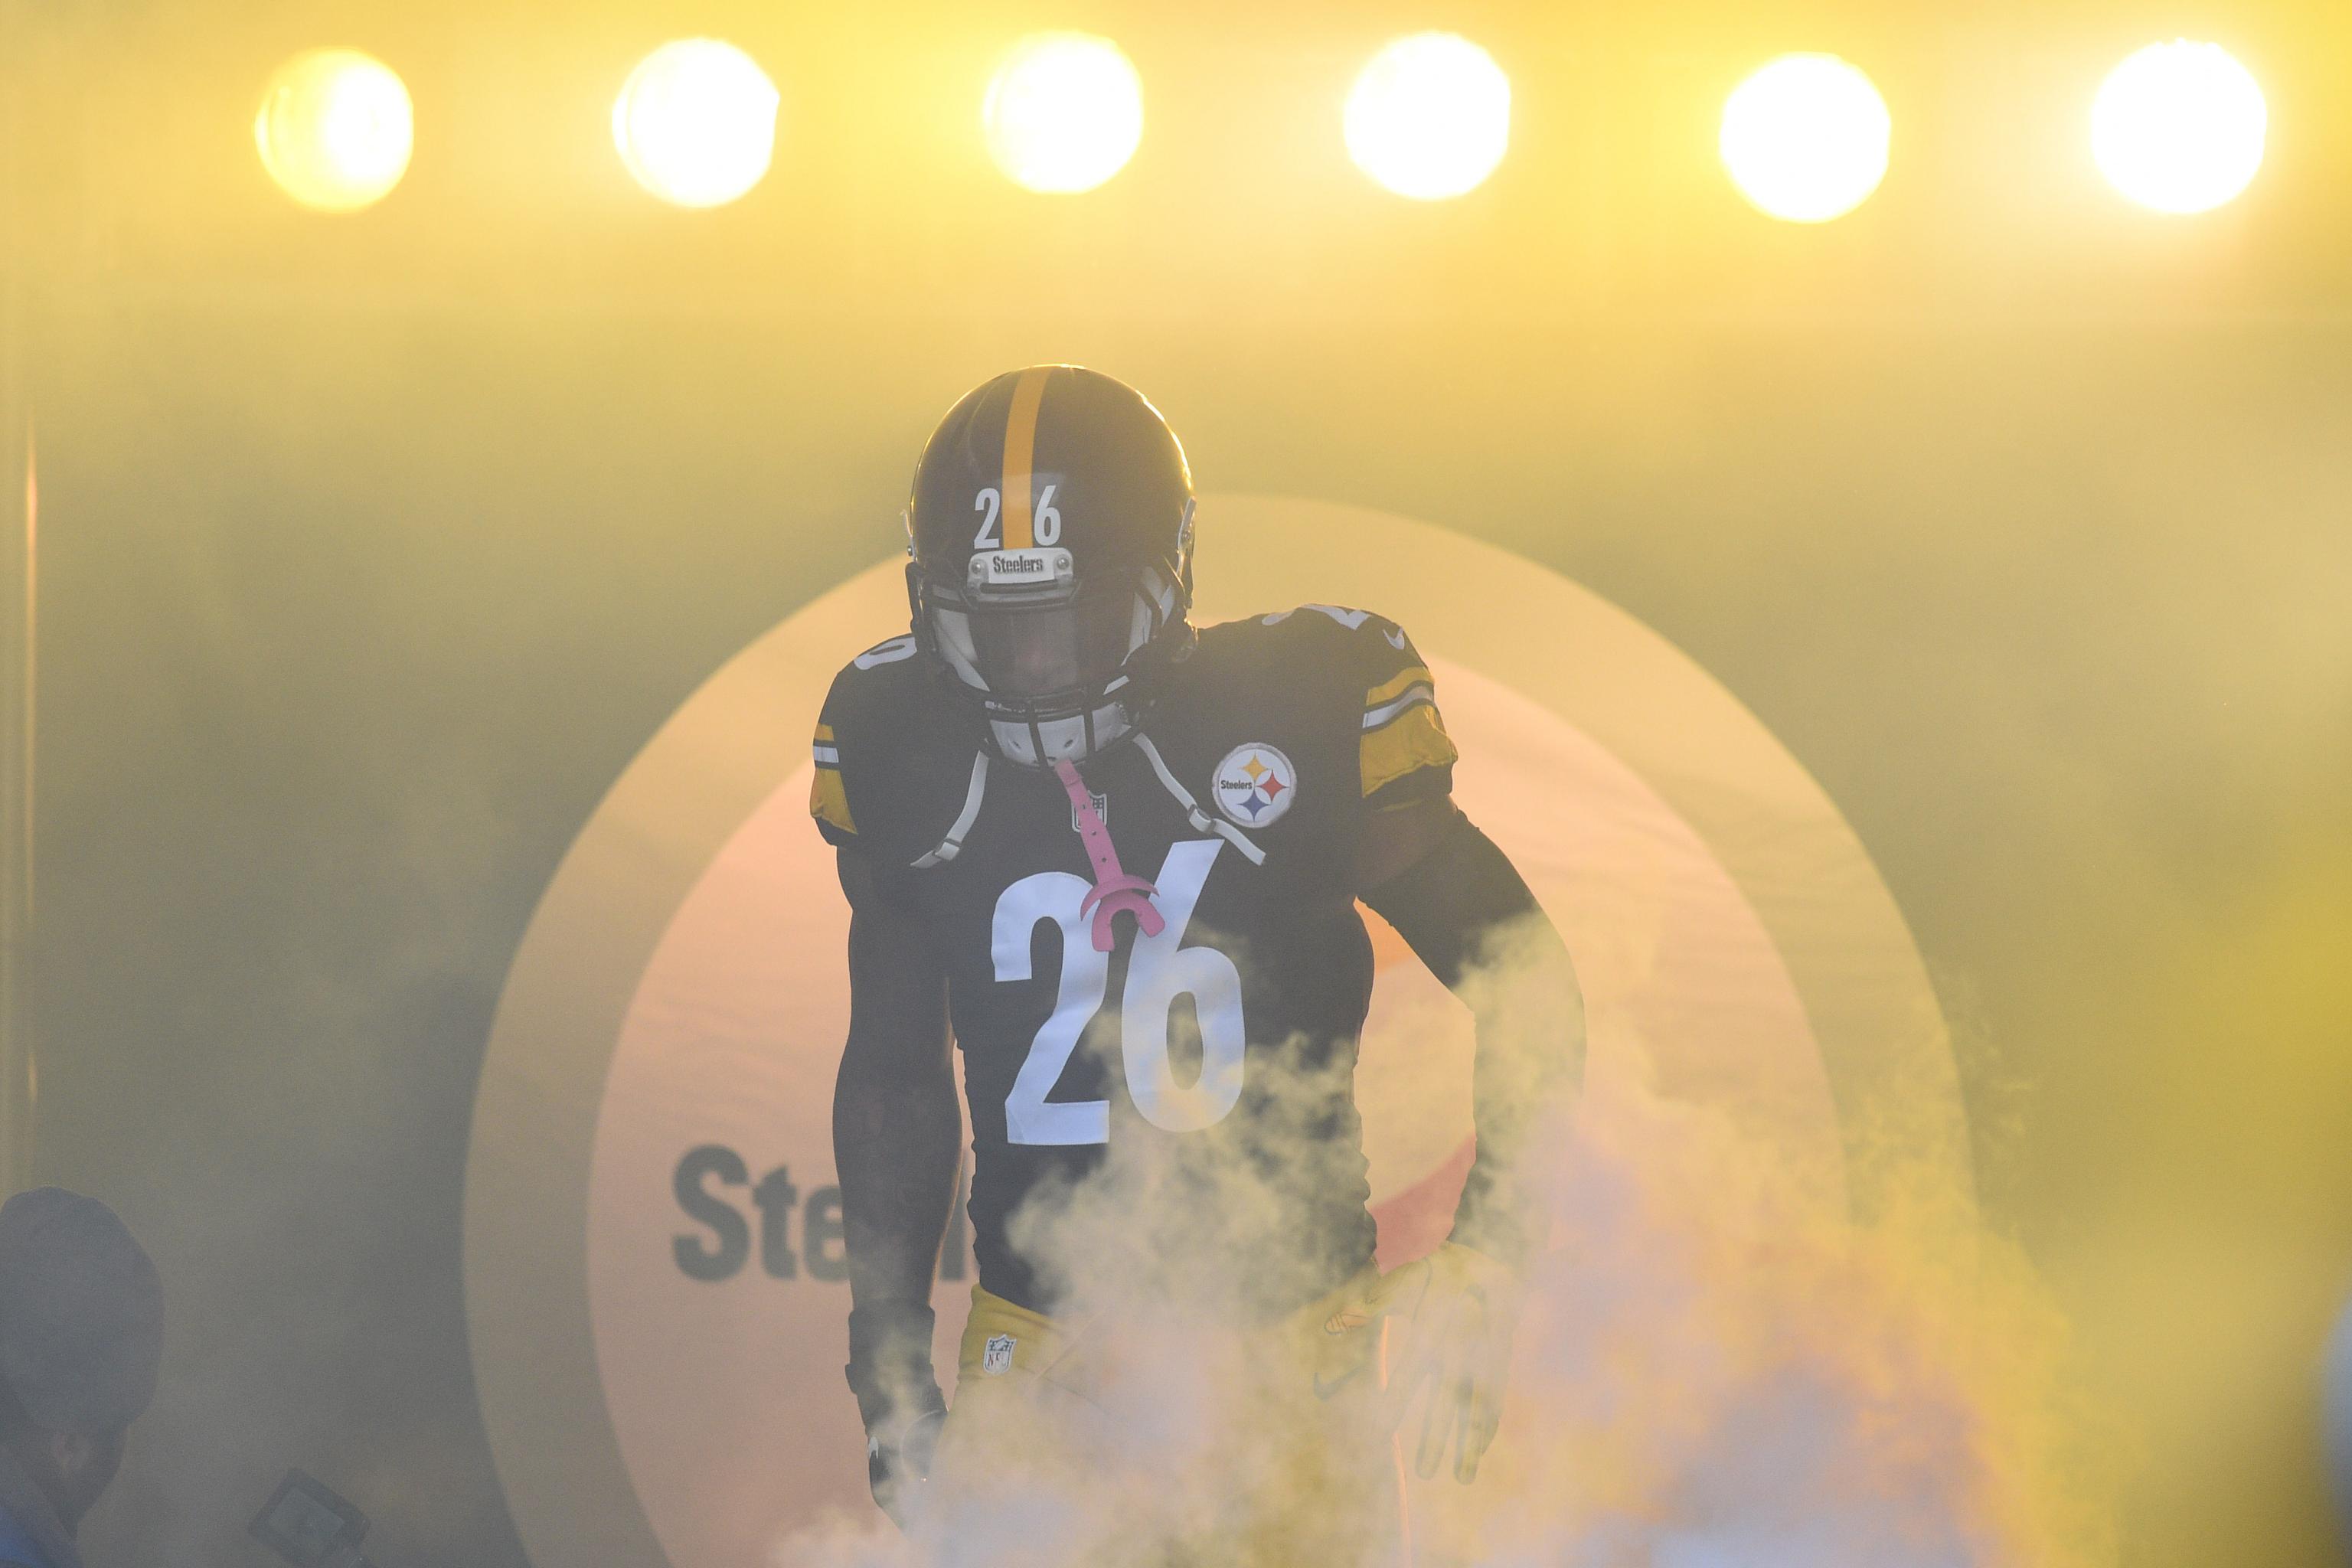 Pittsburgh Steelers Mixtape uniforms, a mashup of old and new